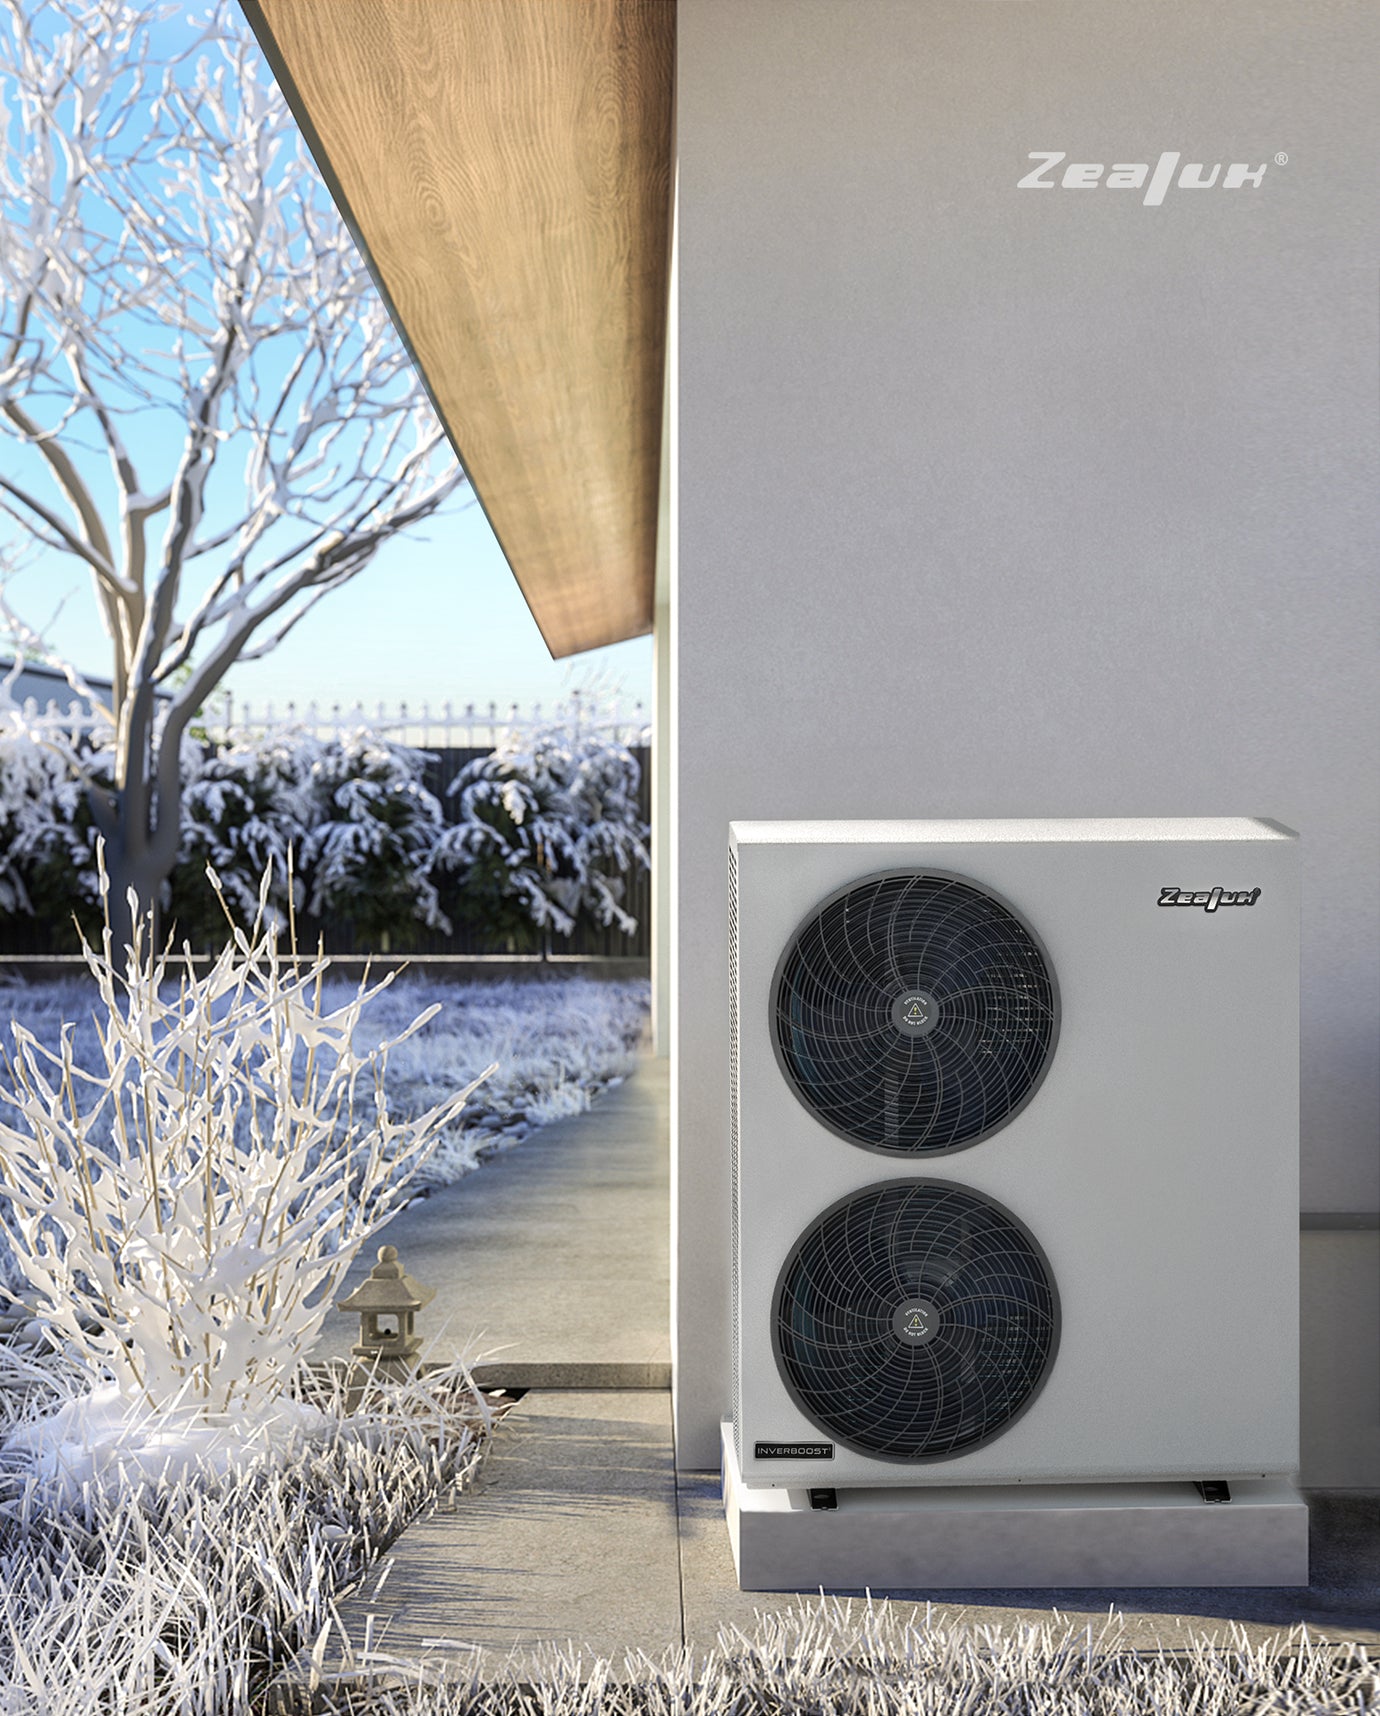 what is the different between the high energy efficiency of the zealux Inverboost technology heat pumps winter and summer